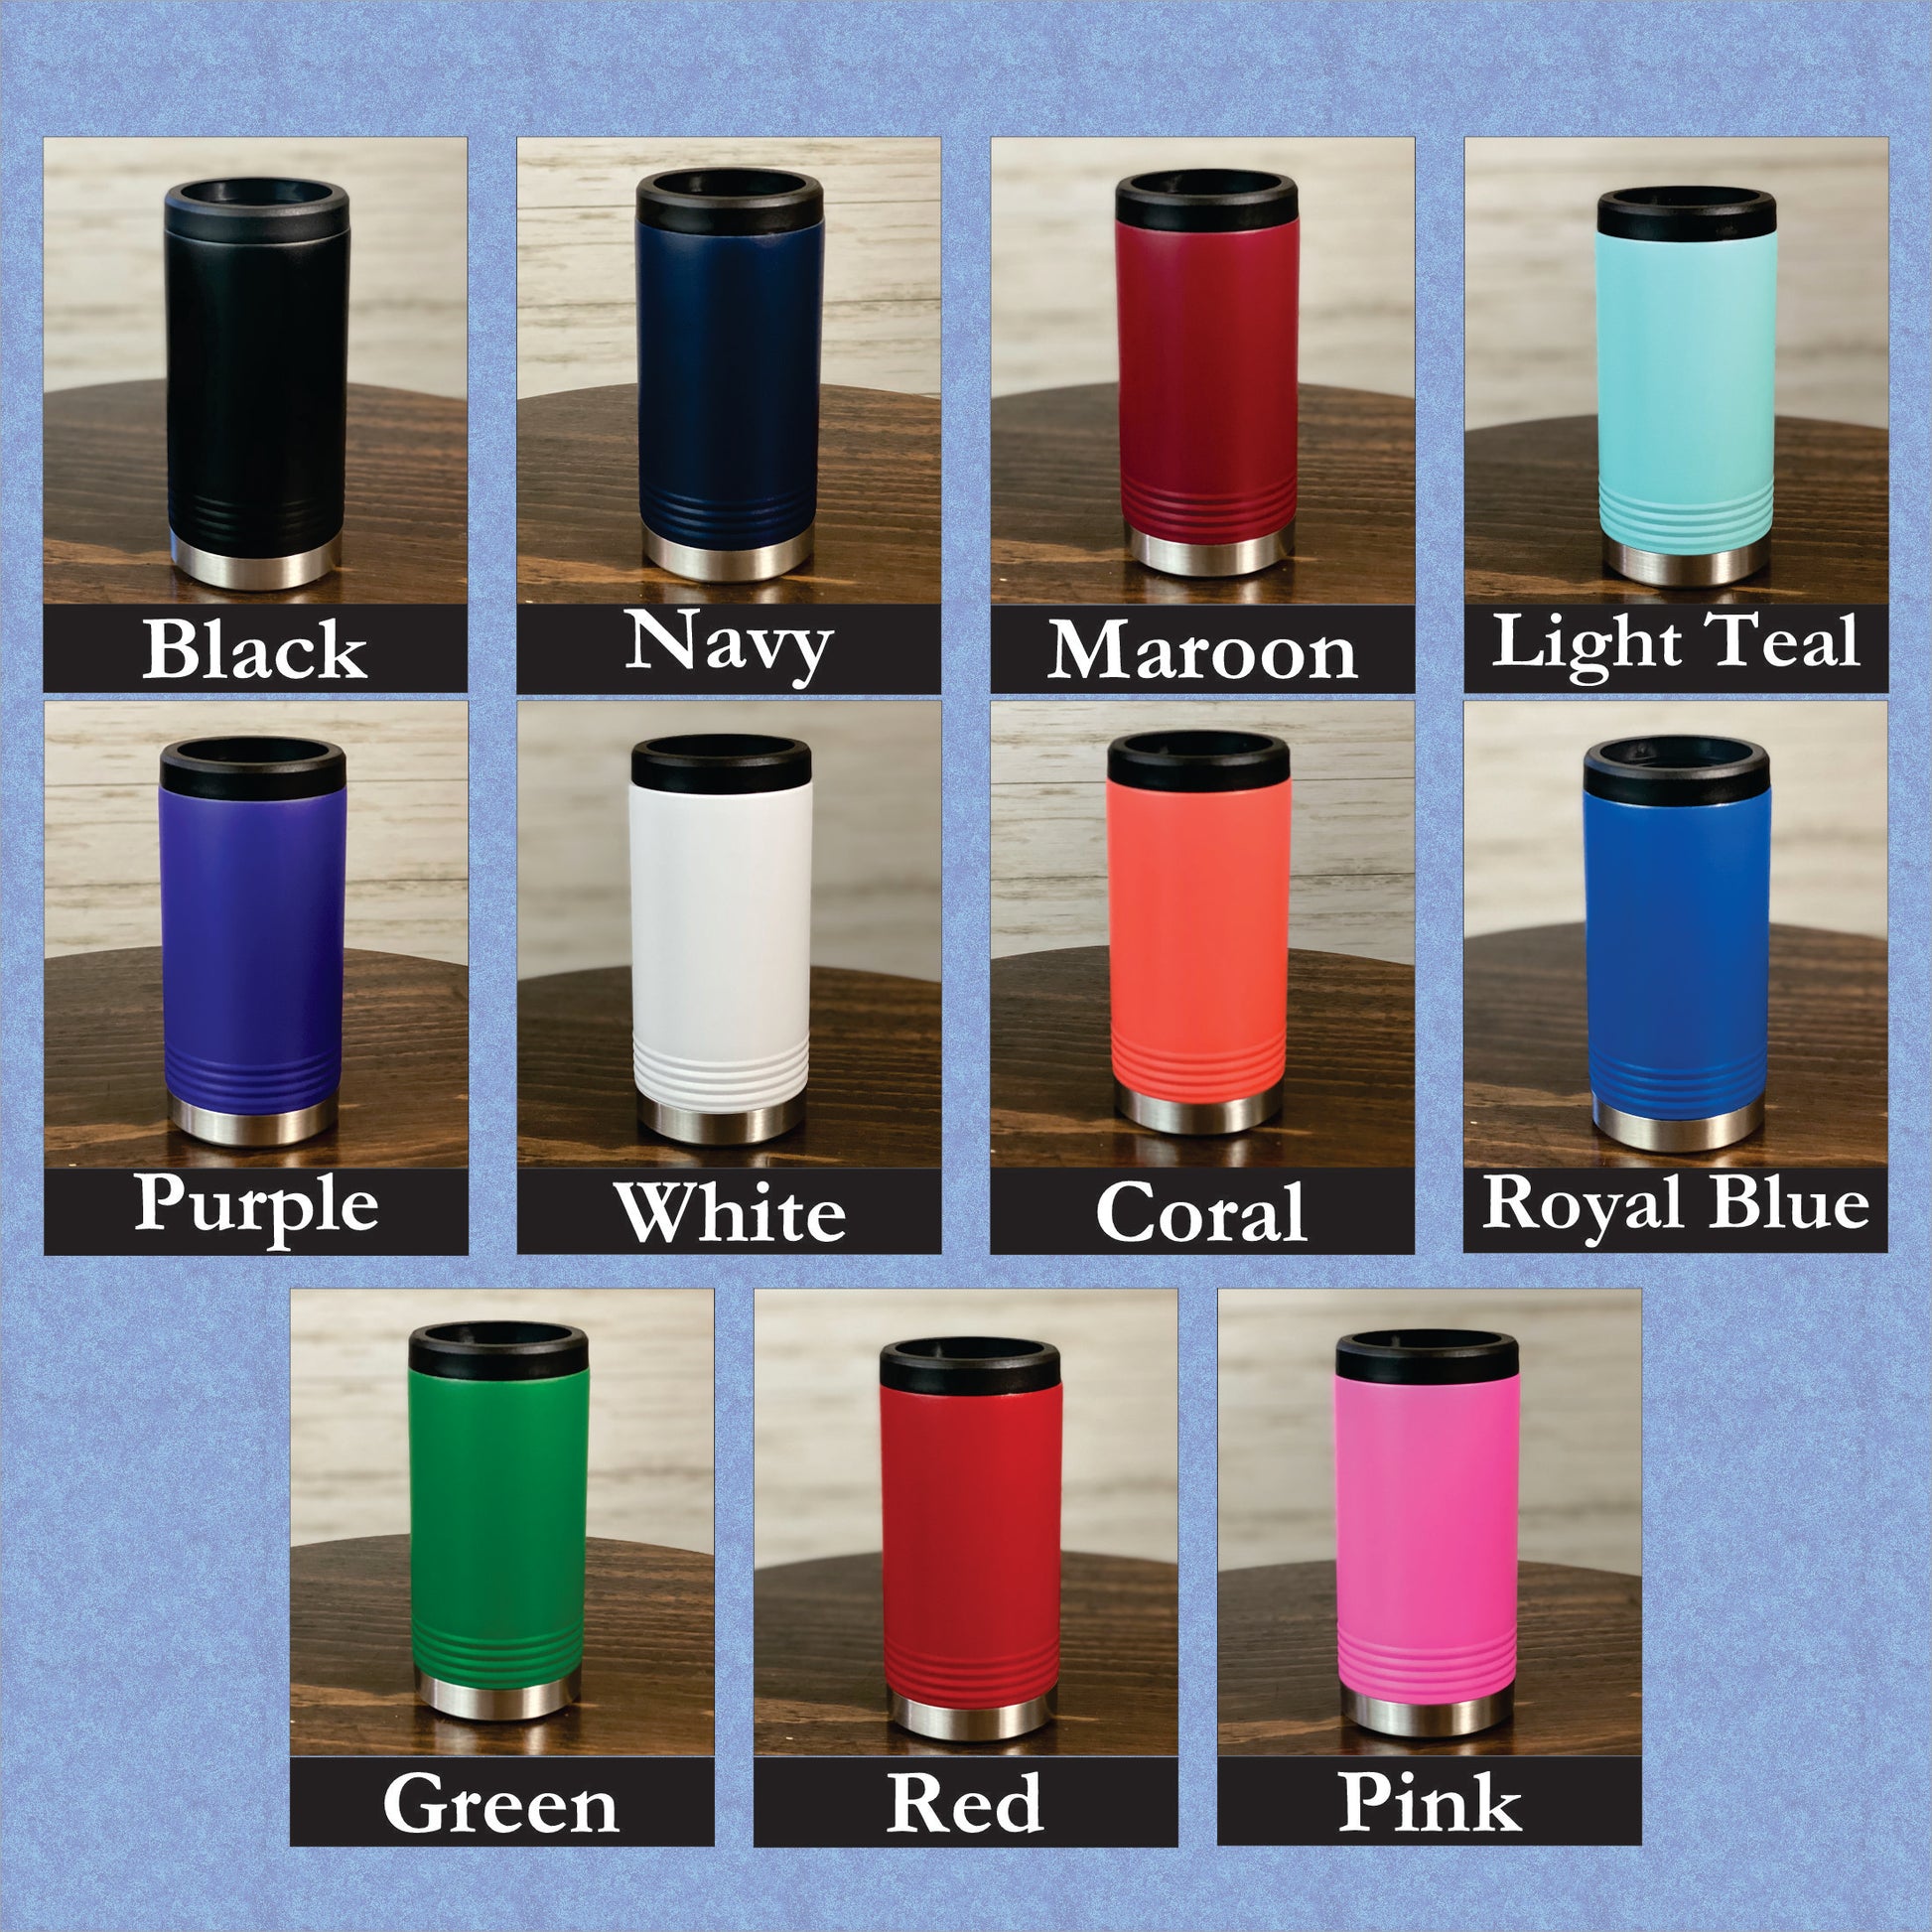 Maroon Insulated Slim Can Koozies - Customized with YOUR design